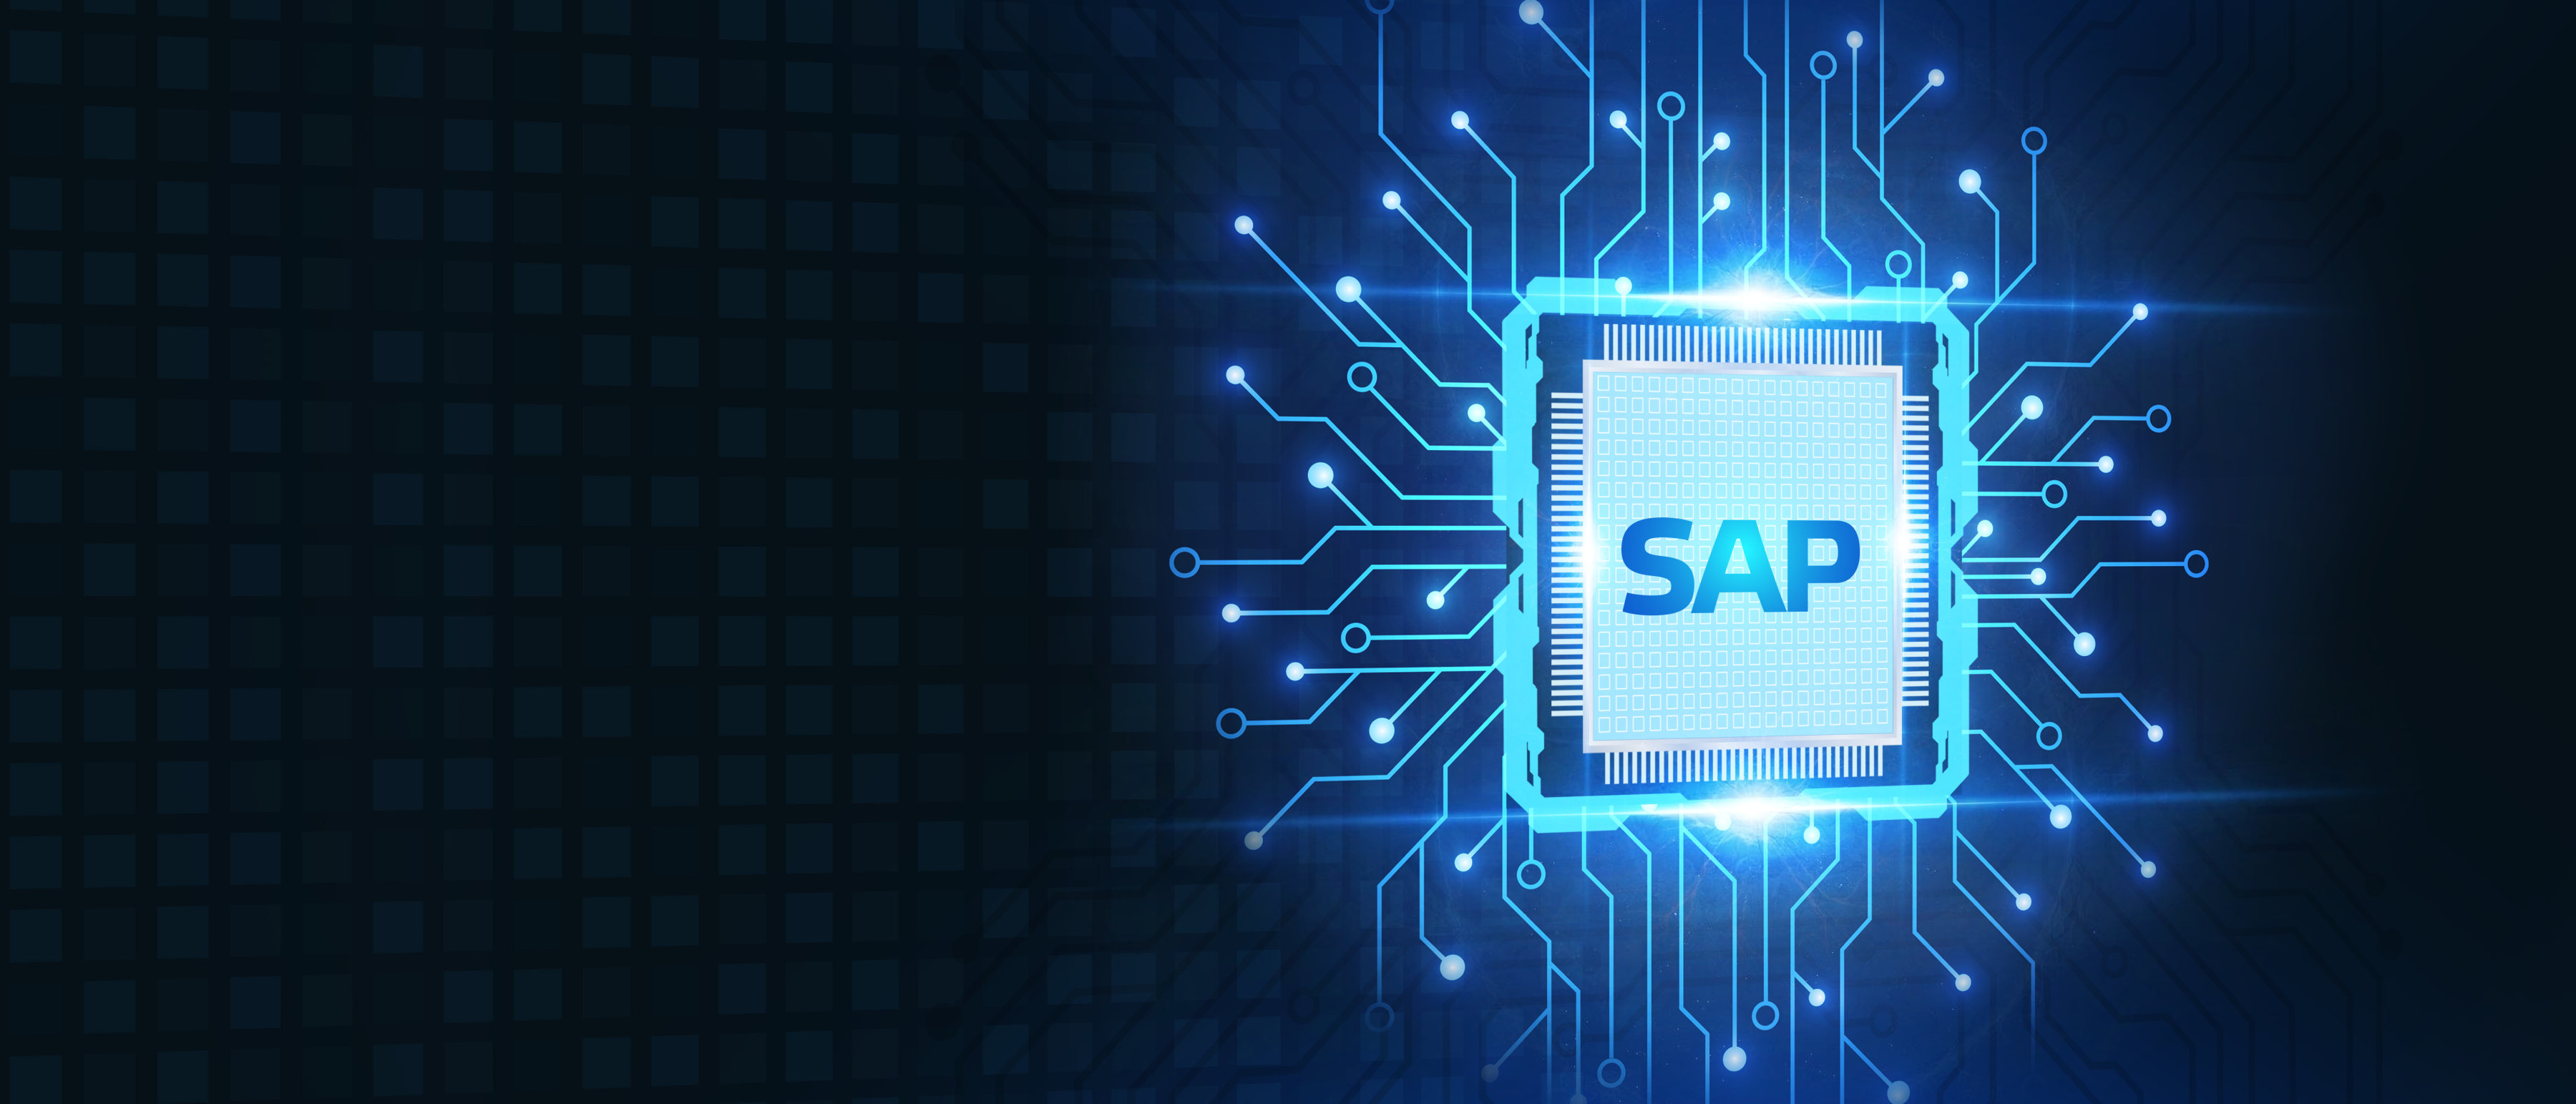 Migrating to S/4HANA? Learn why SAP customers made the switch, what challenges they face, and how they execute their SAP S/4HANA migration.